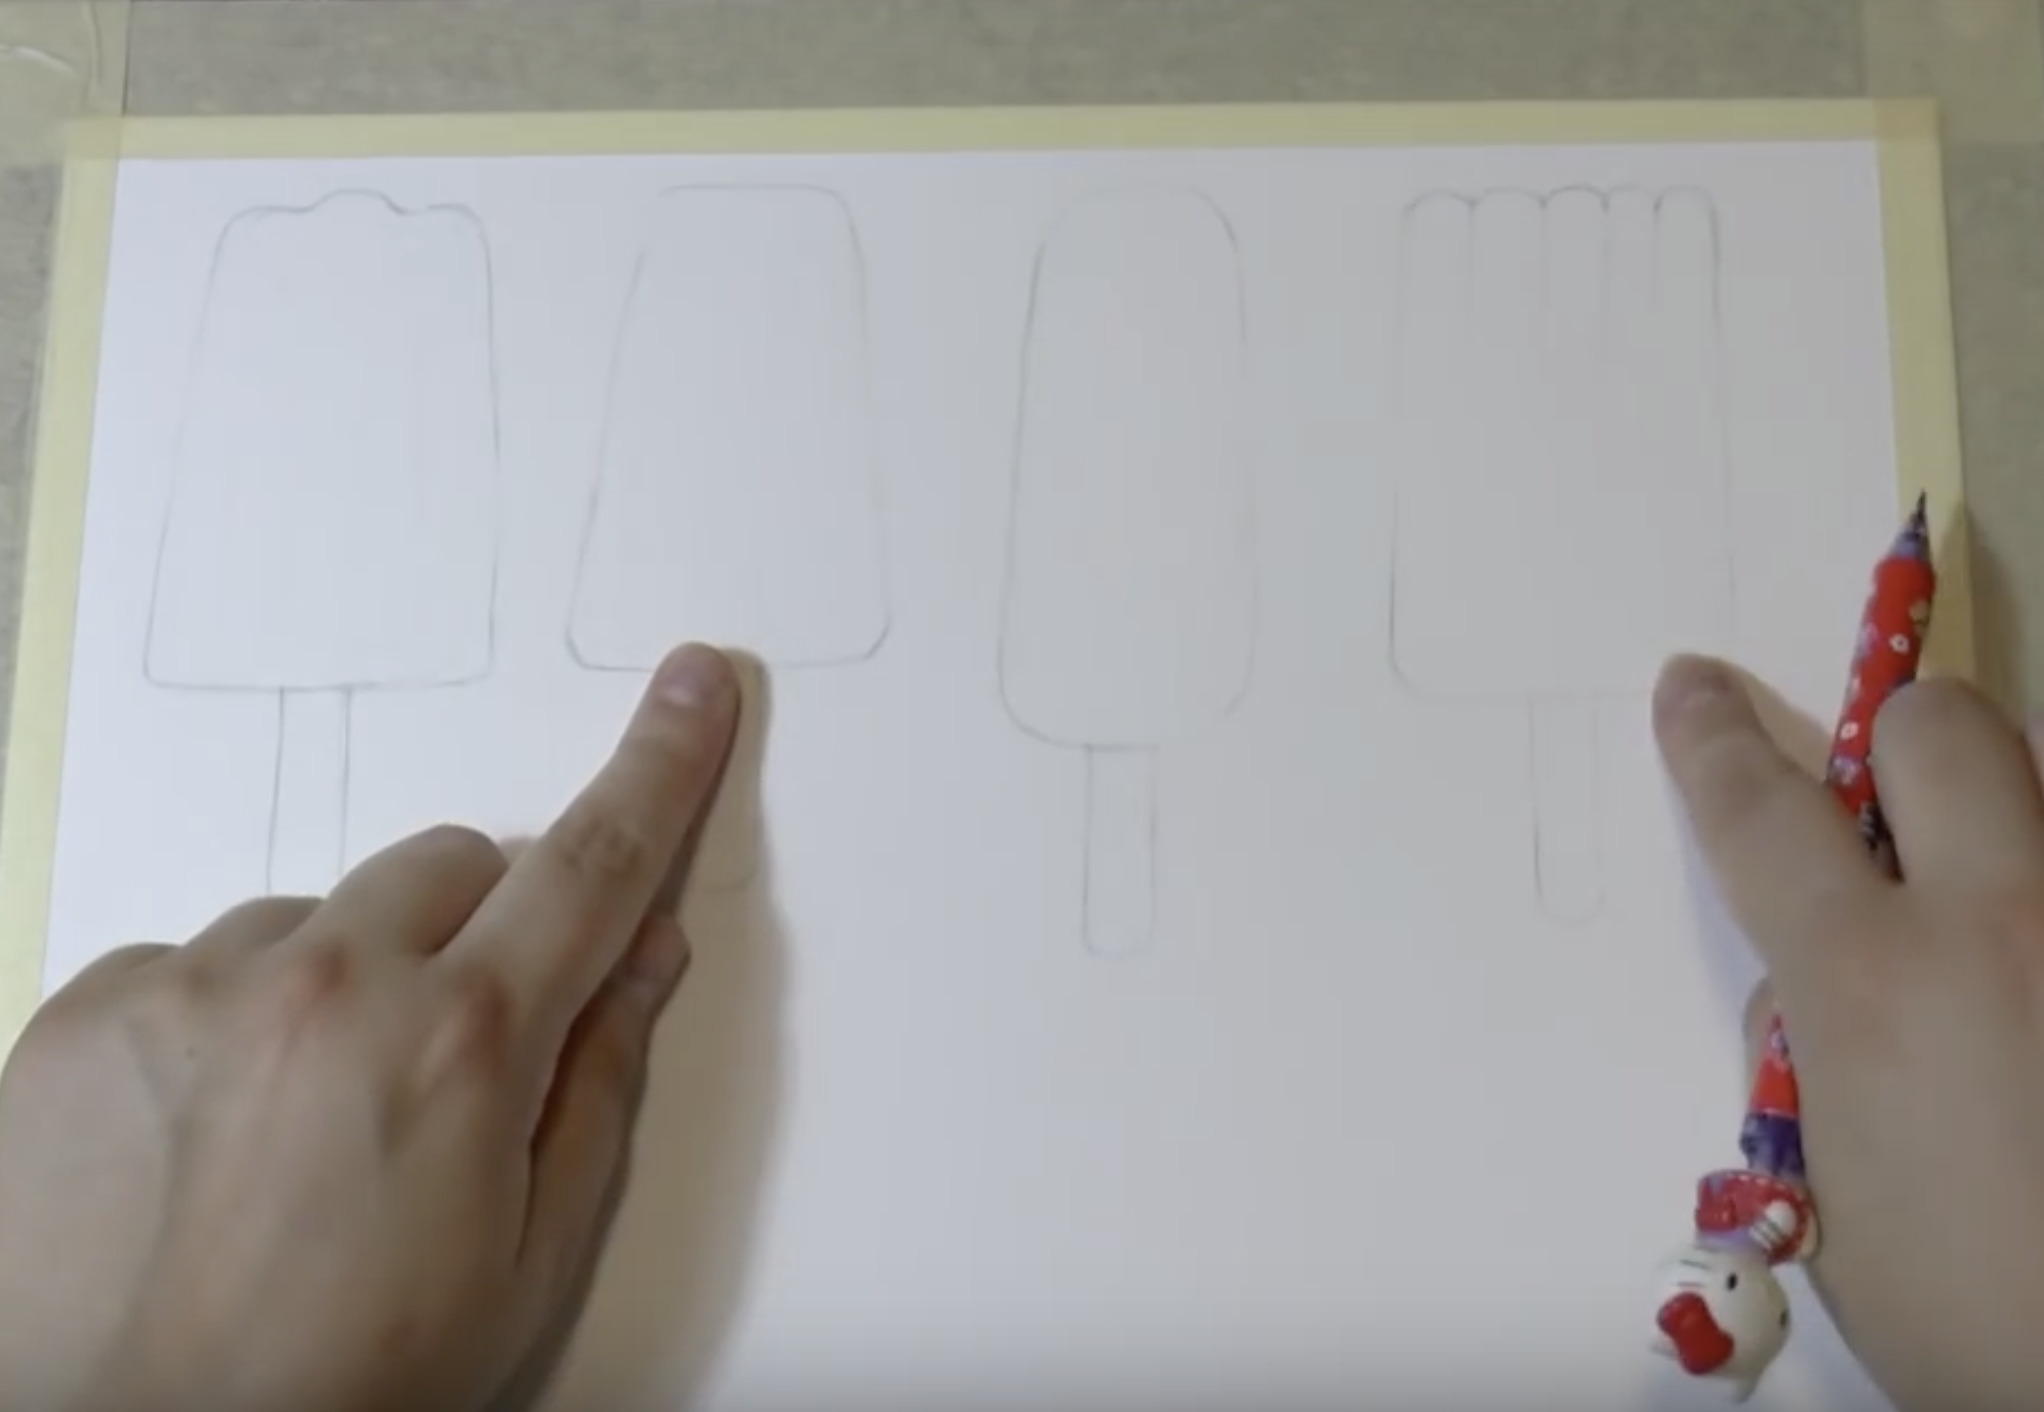 easy-watercolor-ideas-techniques-how-to-paint-a-watercolor-popsicle - Step 2